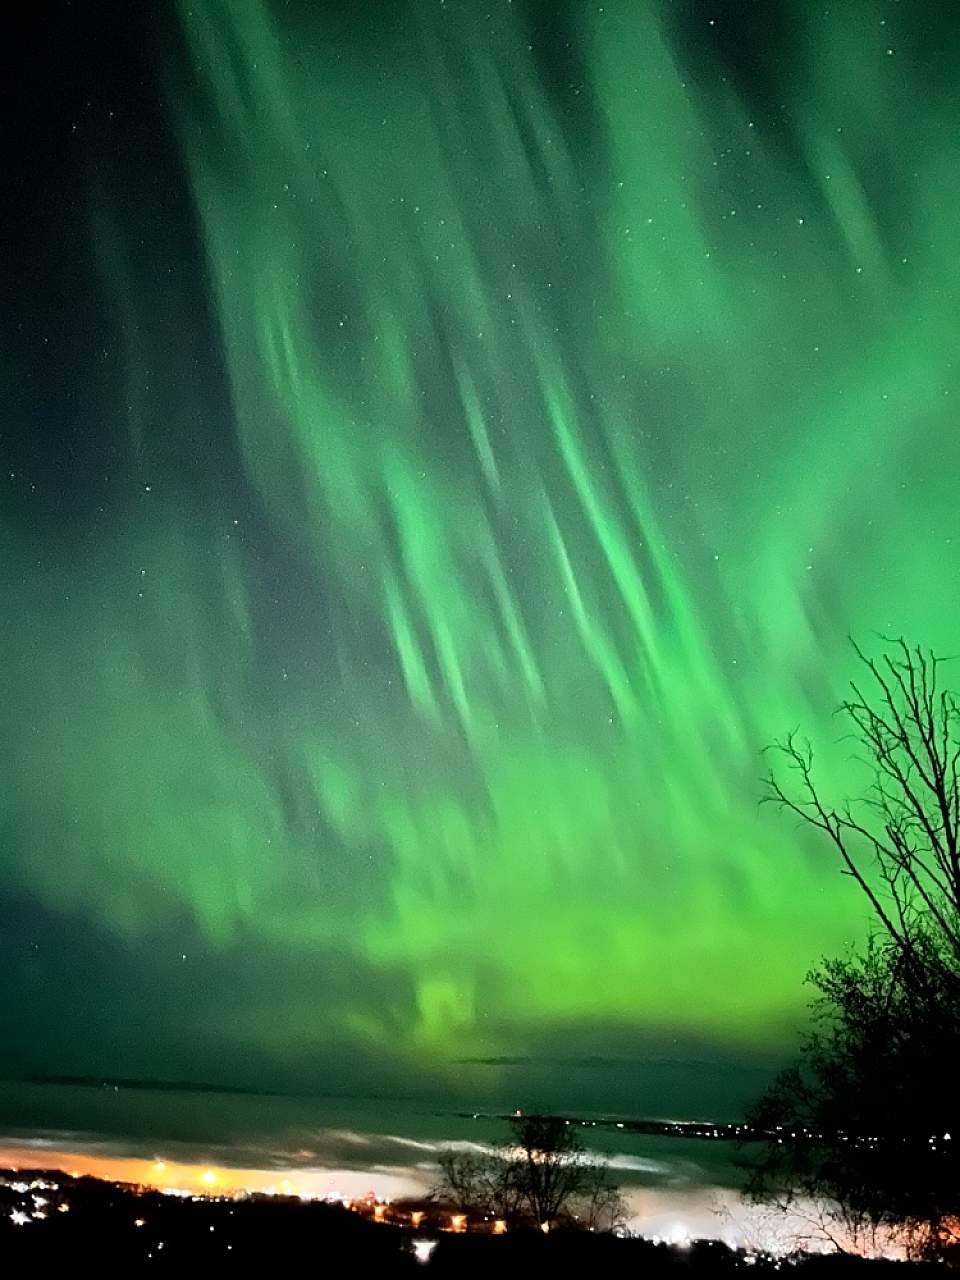 Views of the Aurora Borealis right off the back porch captured by Daniel Roach